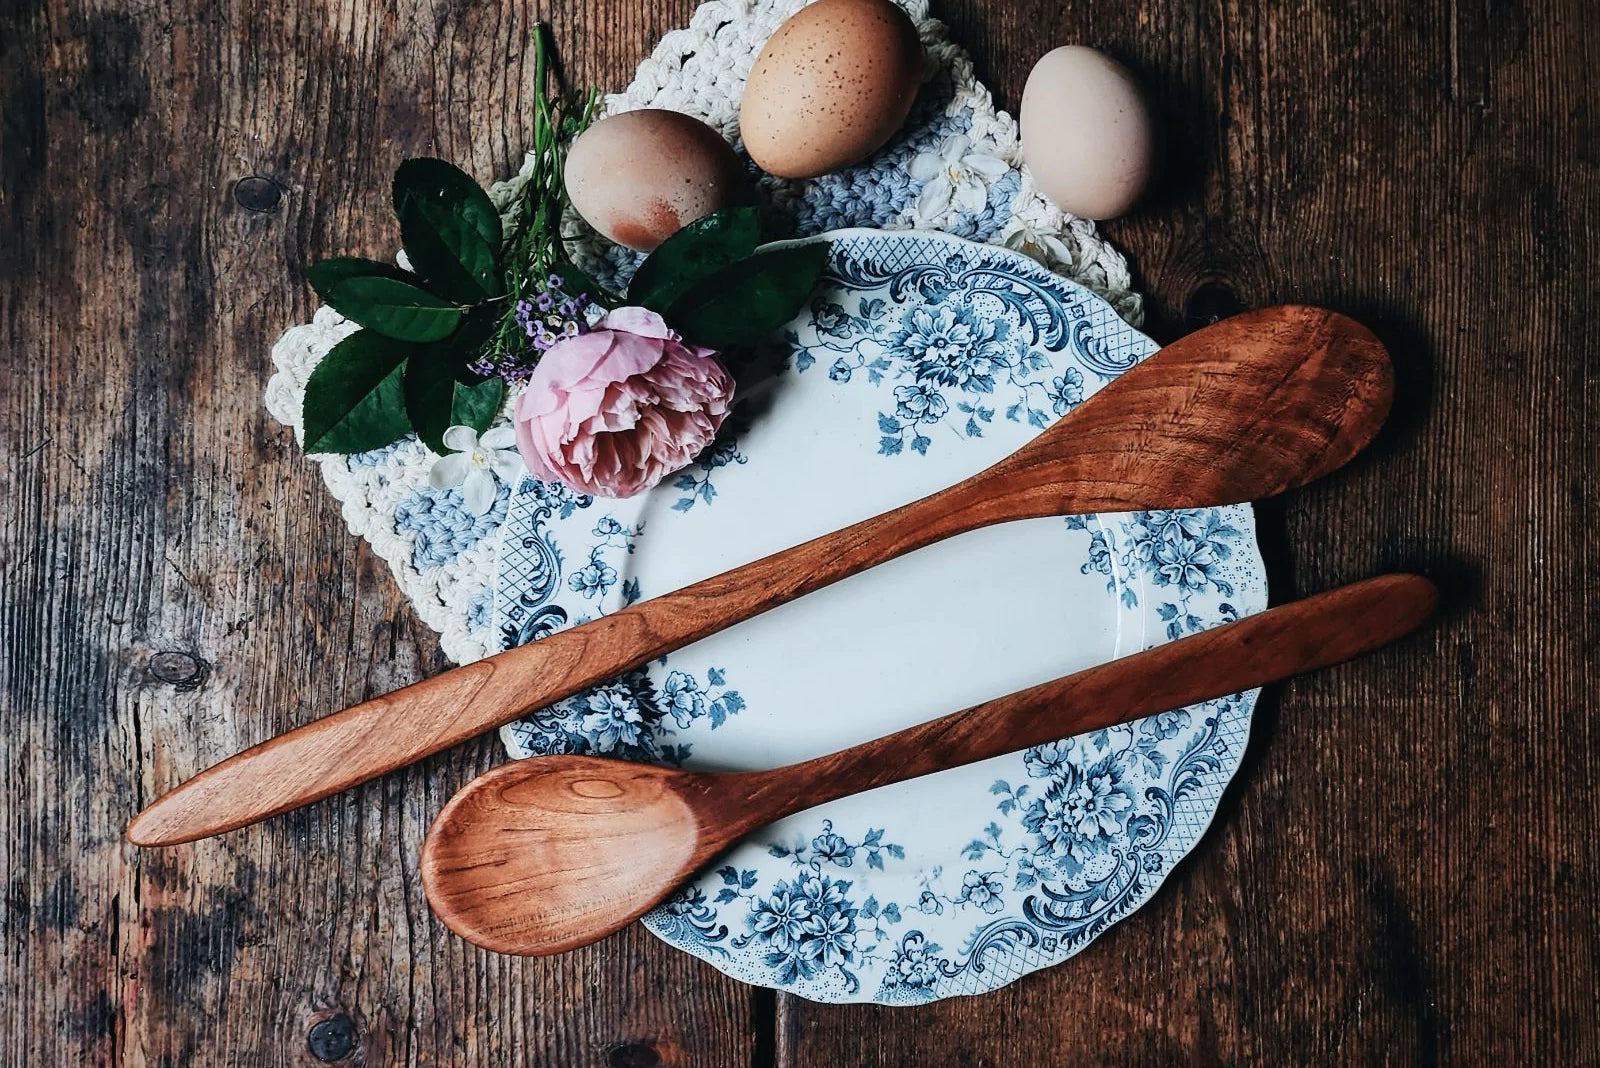 Handmade wooden spoons are arranged on a fancy plate and surrounded by eggs and flowers